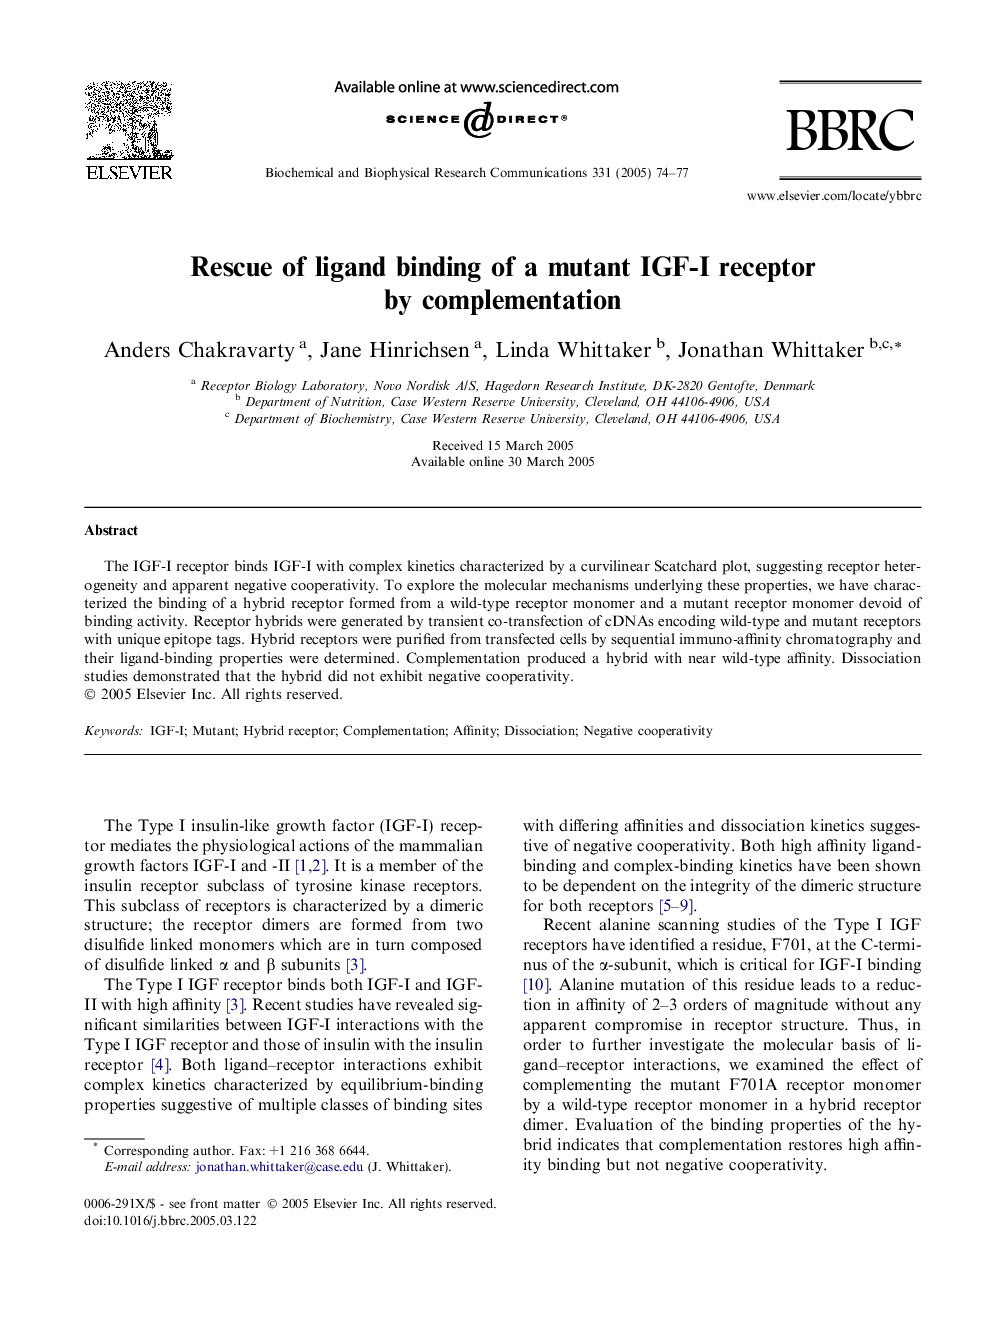 Rescue of ligand binding of a mutant IGF-I receptor by complementation